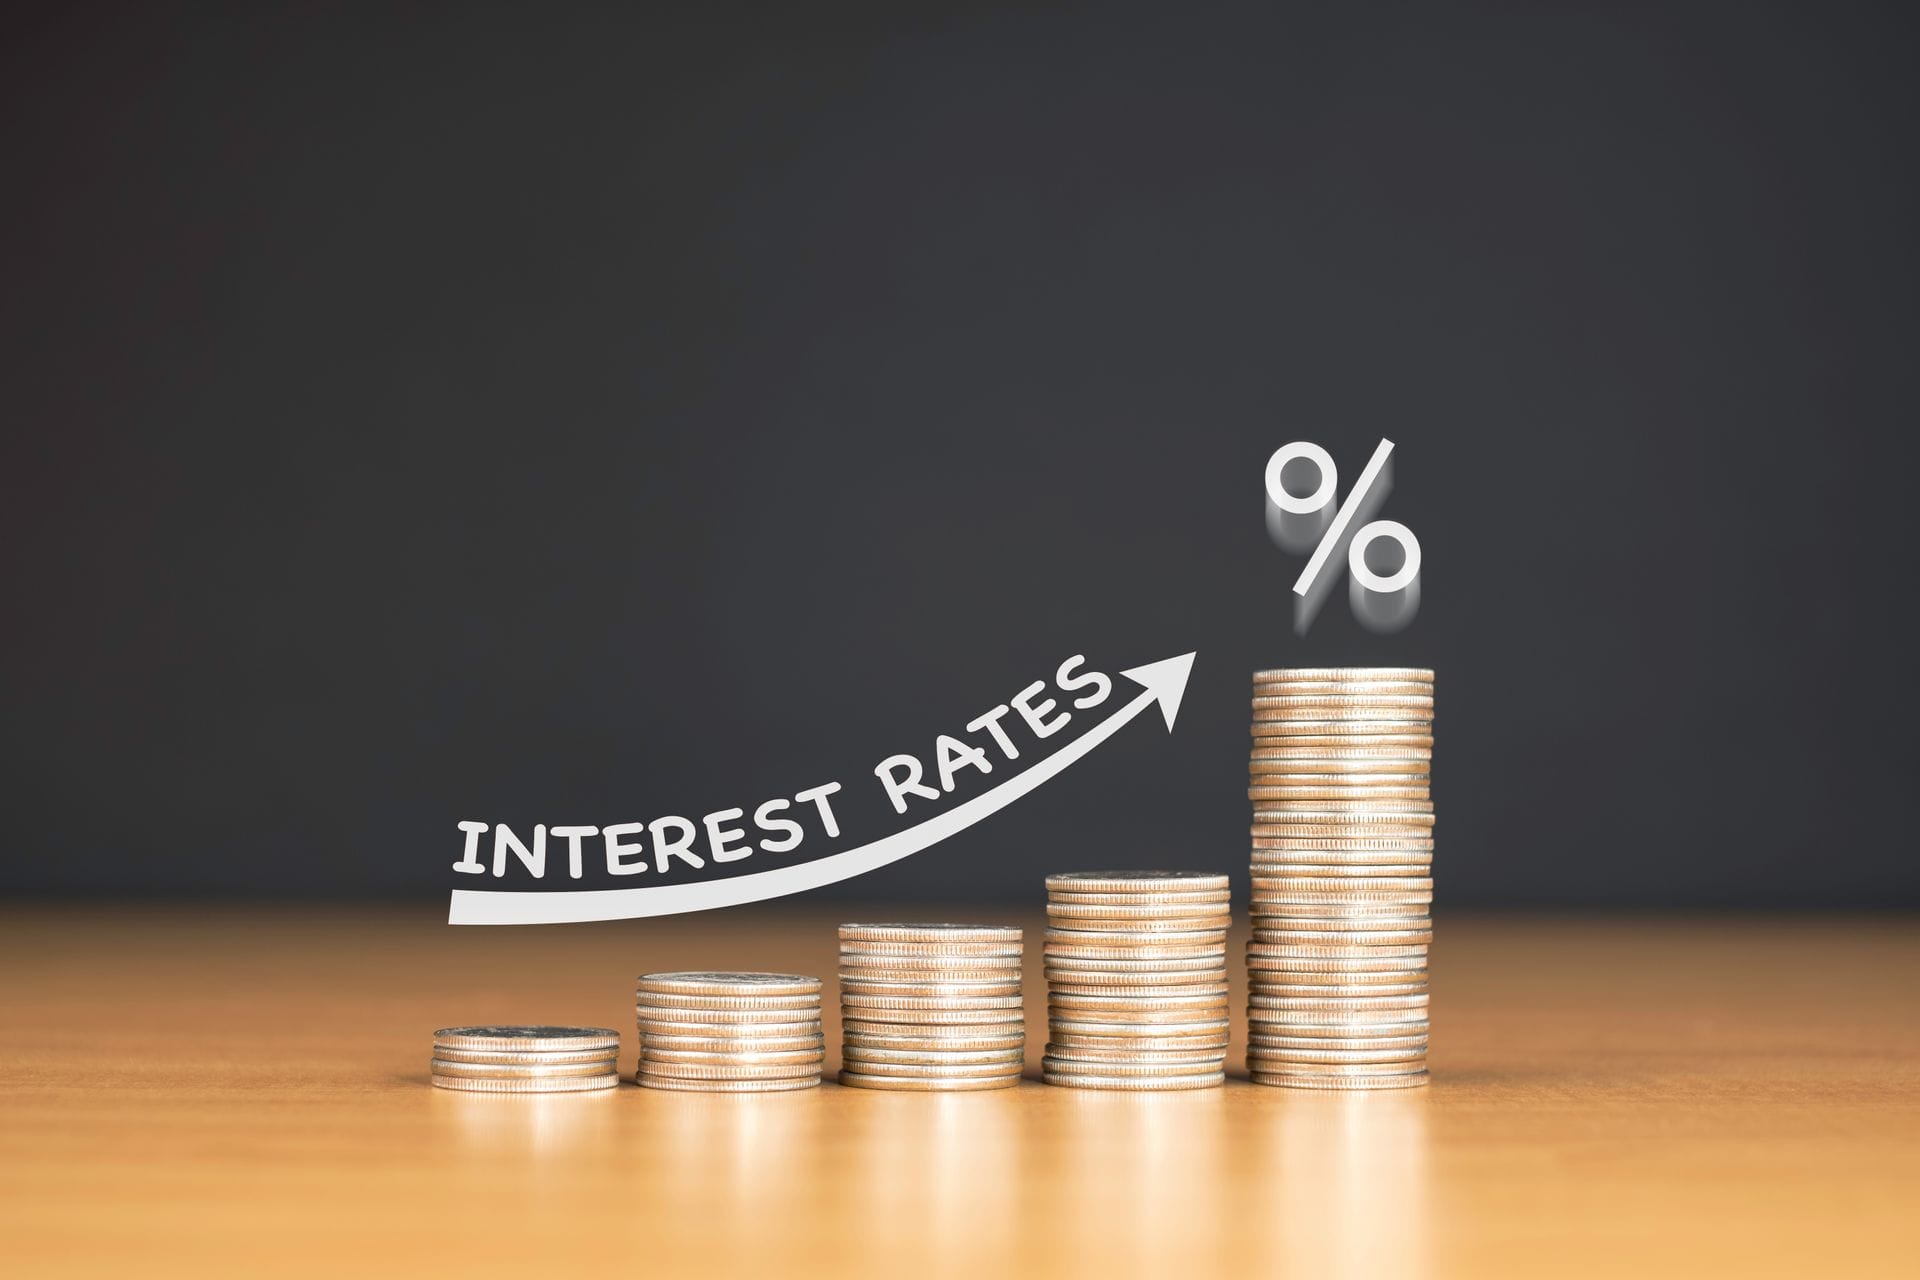 Does the cash right rise affect home loan interest rates for Aussie homeowners?